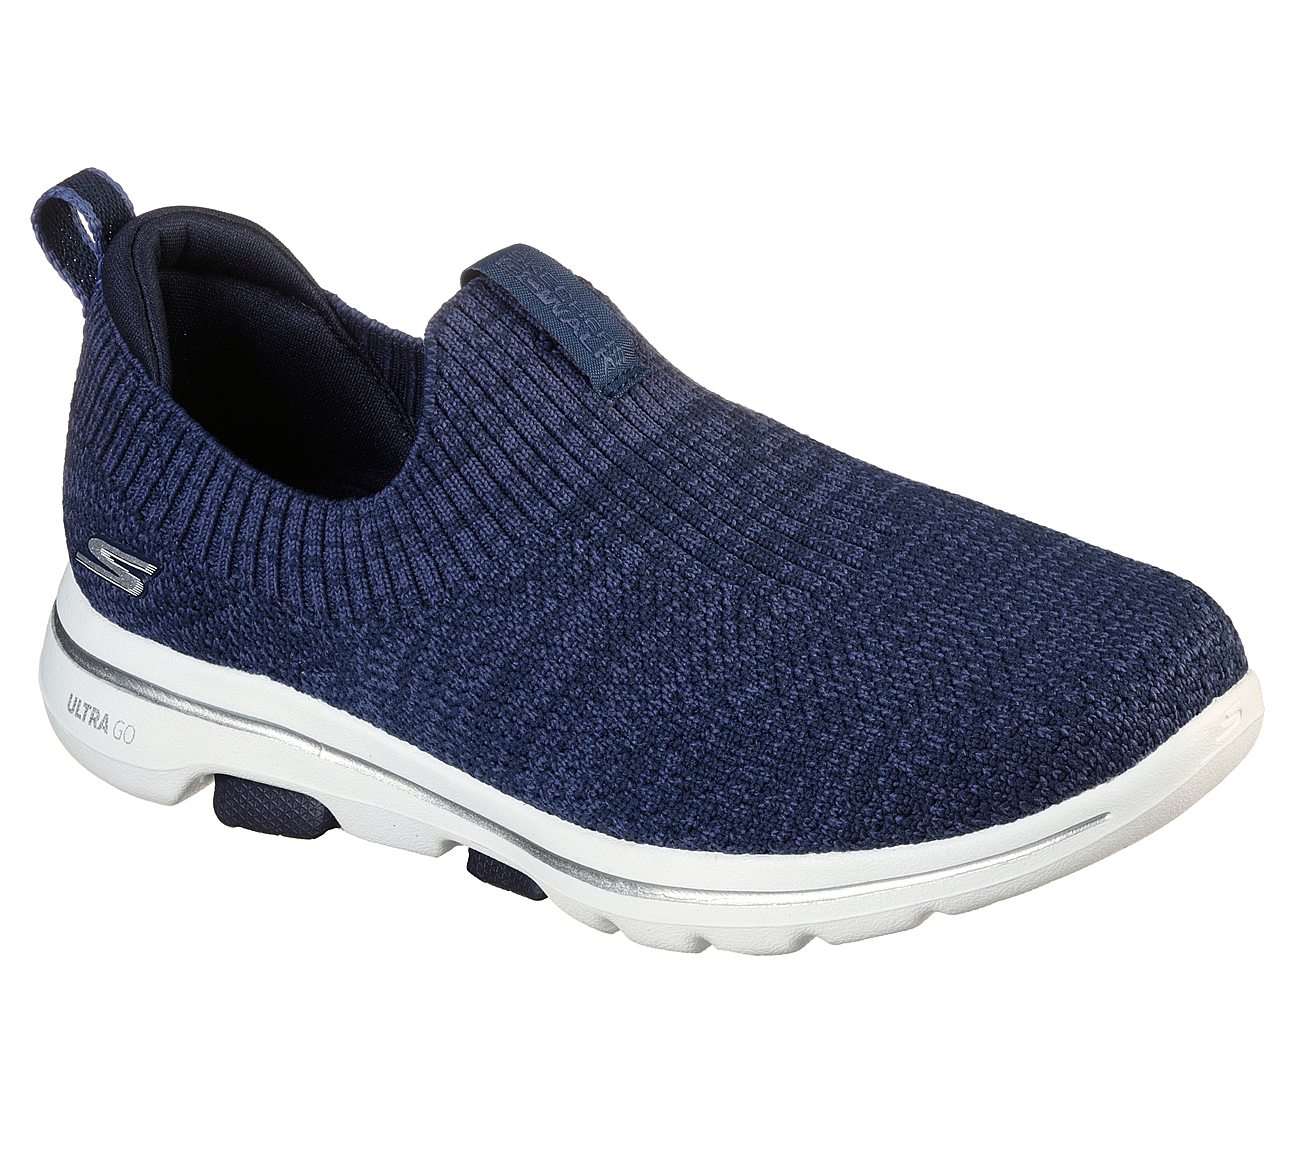 GO WALK 5 - TRENDY, NAVY/WHITE Footwear Lateral View